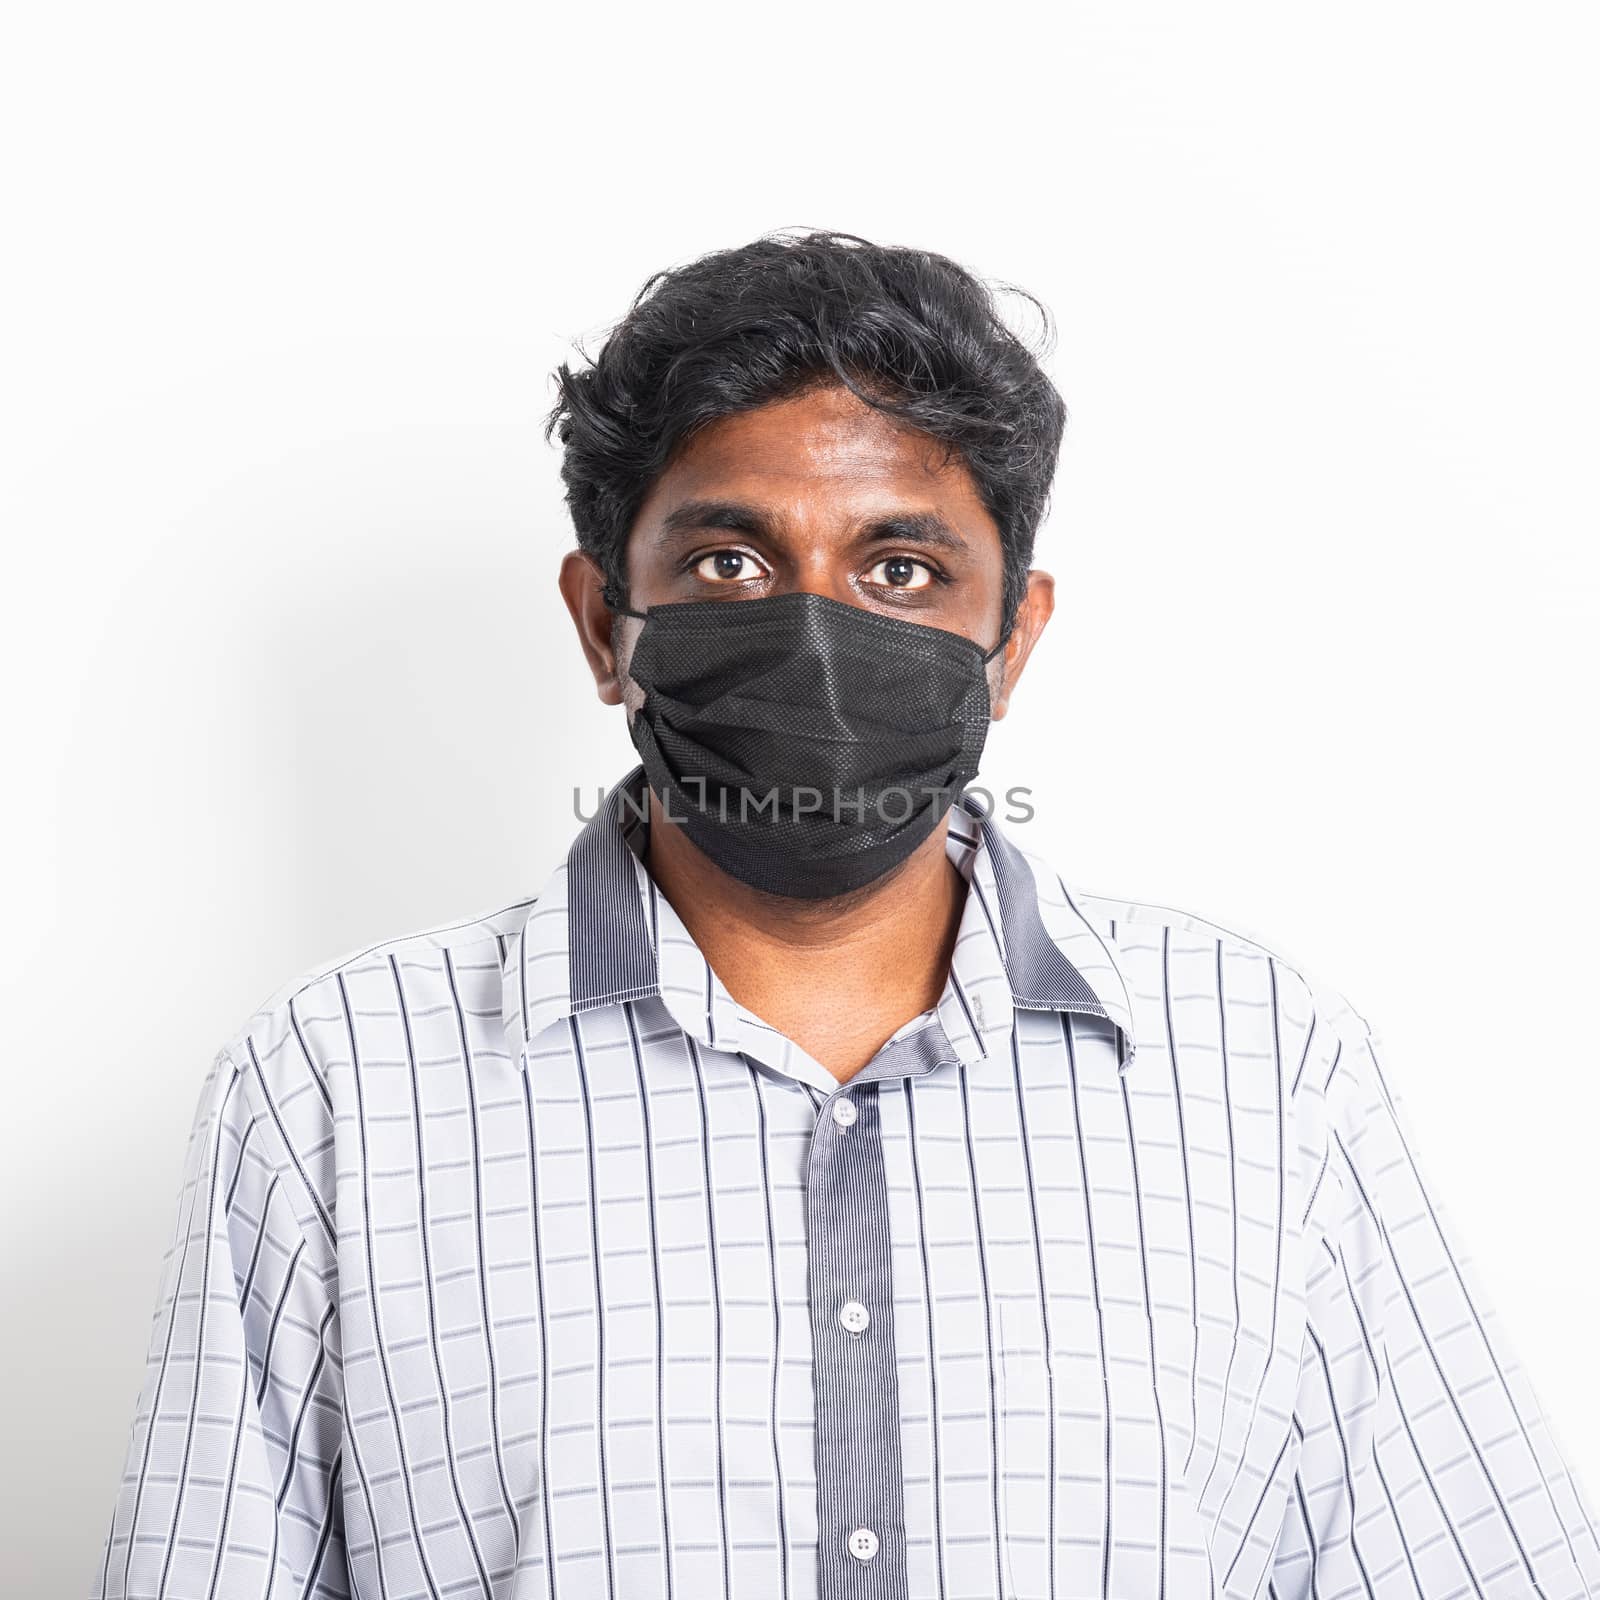 Asian happy portrait young black man wearing face mask protective from virus coronavirus epidemic or air pollution looking camera, studio shot isolated on white background, stop COVID-19 concept 